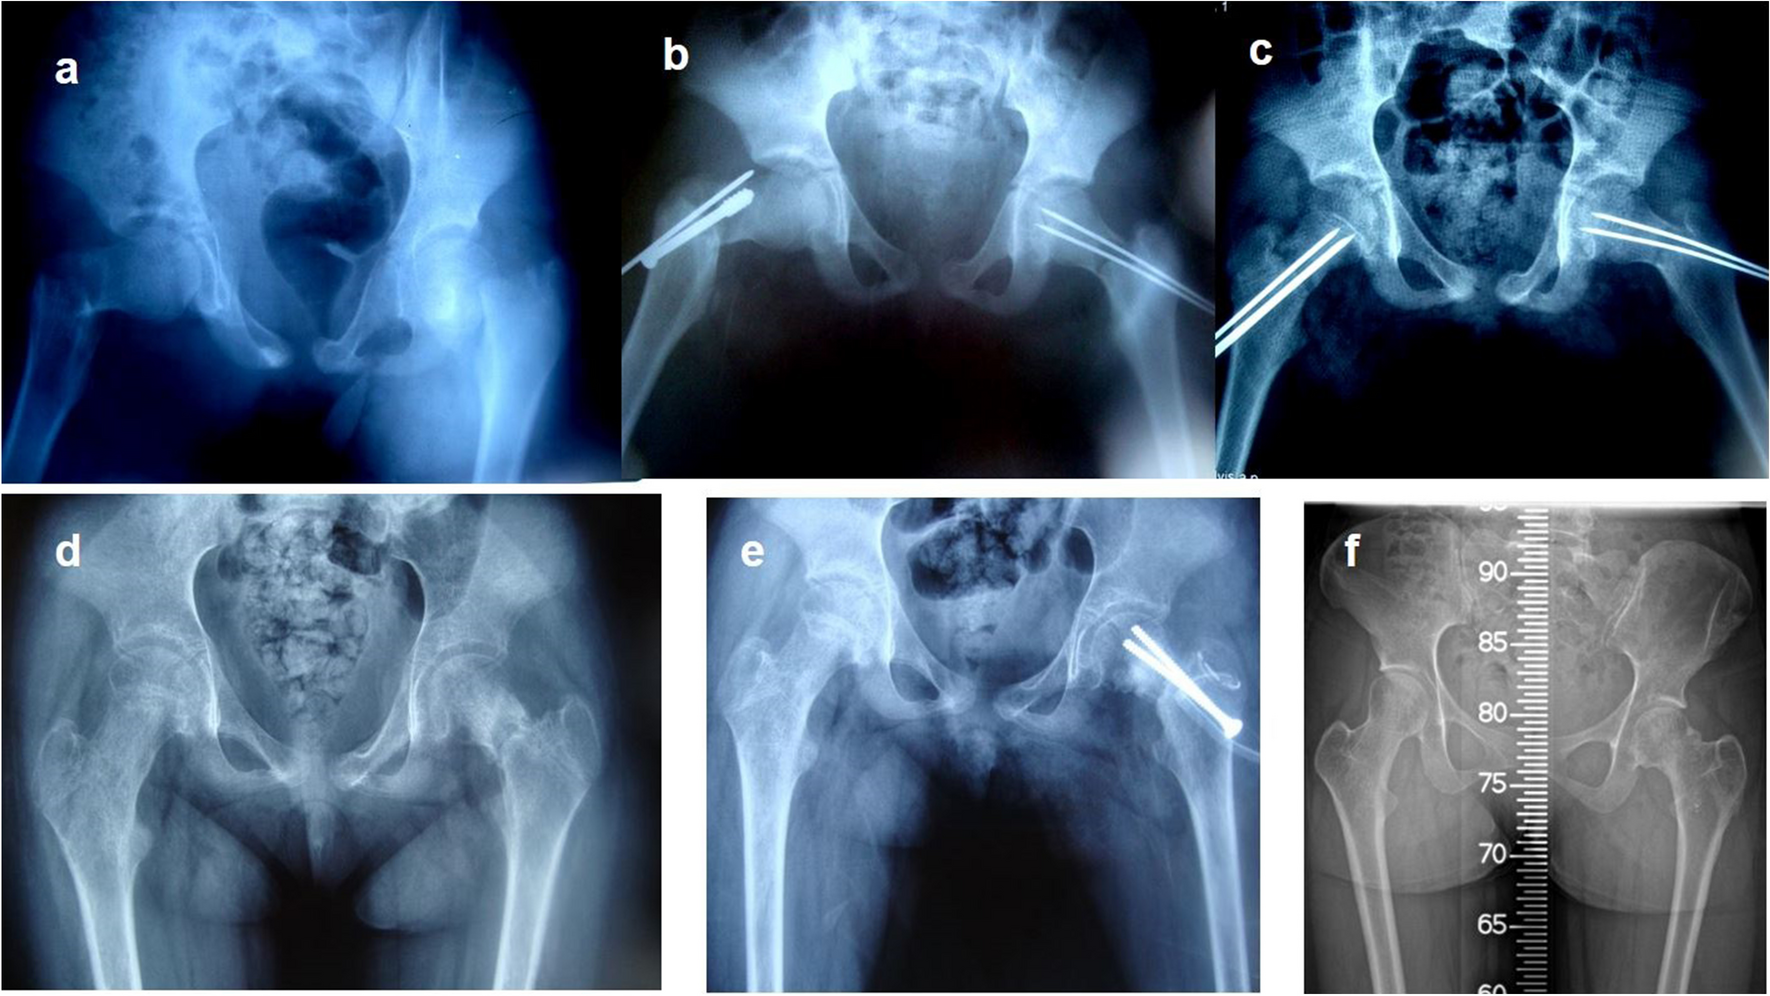 Analysis of influential factors on surgical outcomes in pediatric femur neck fractures: a single-institution retrospective study